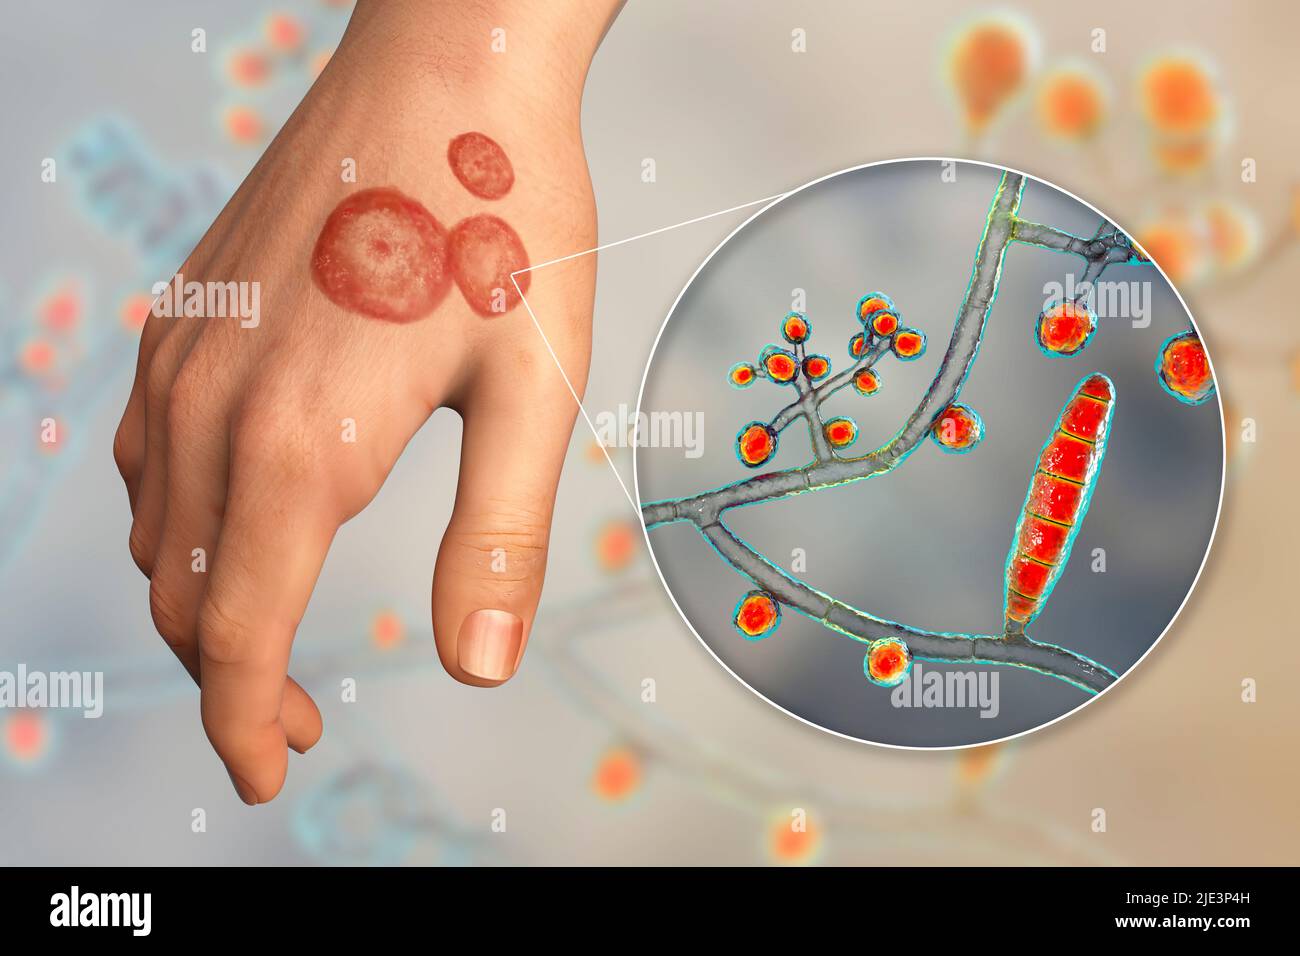 Ringworm On A Human Arm Fungal Infection Of The Skin Stock Illustration -  Download Image Now - iStock